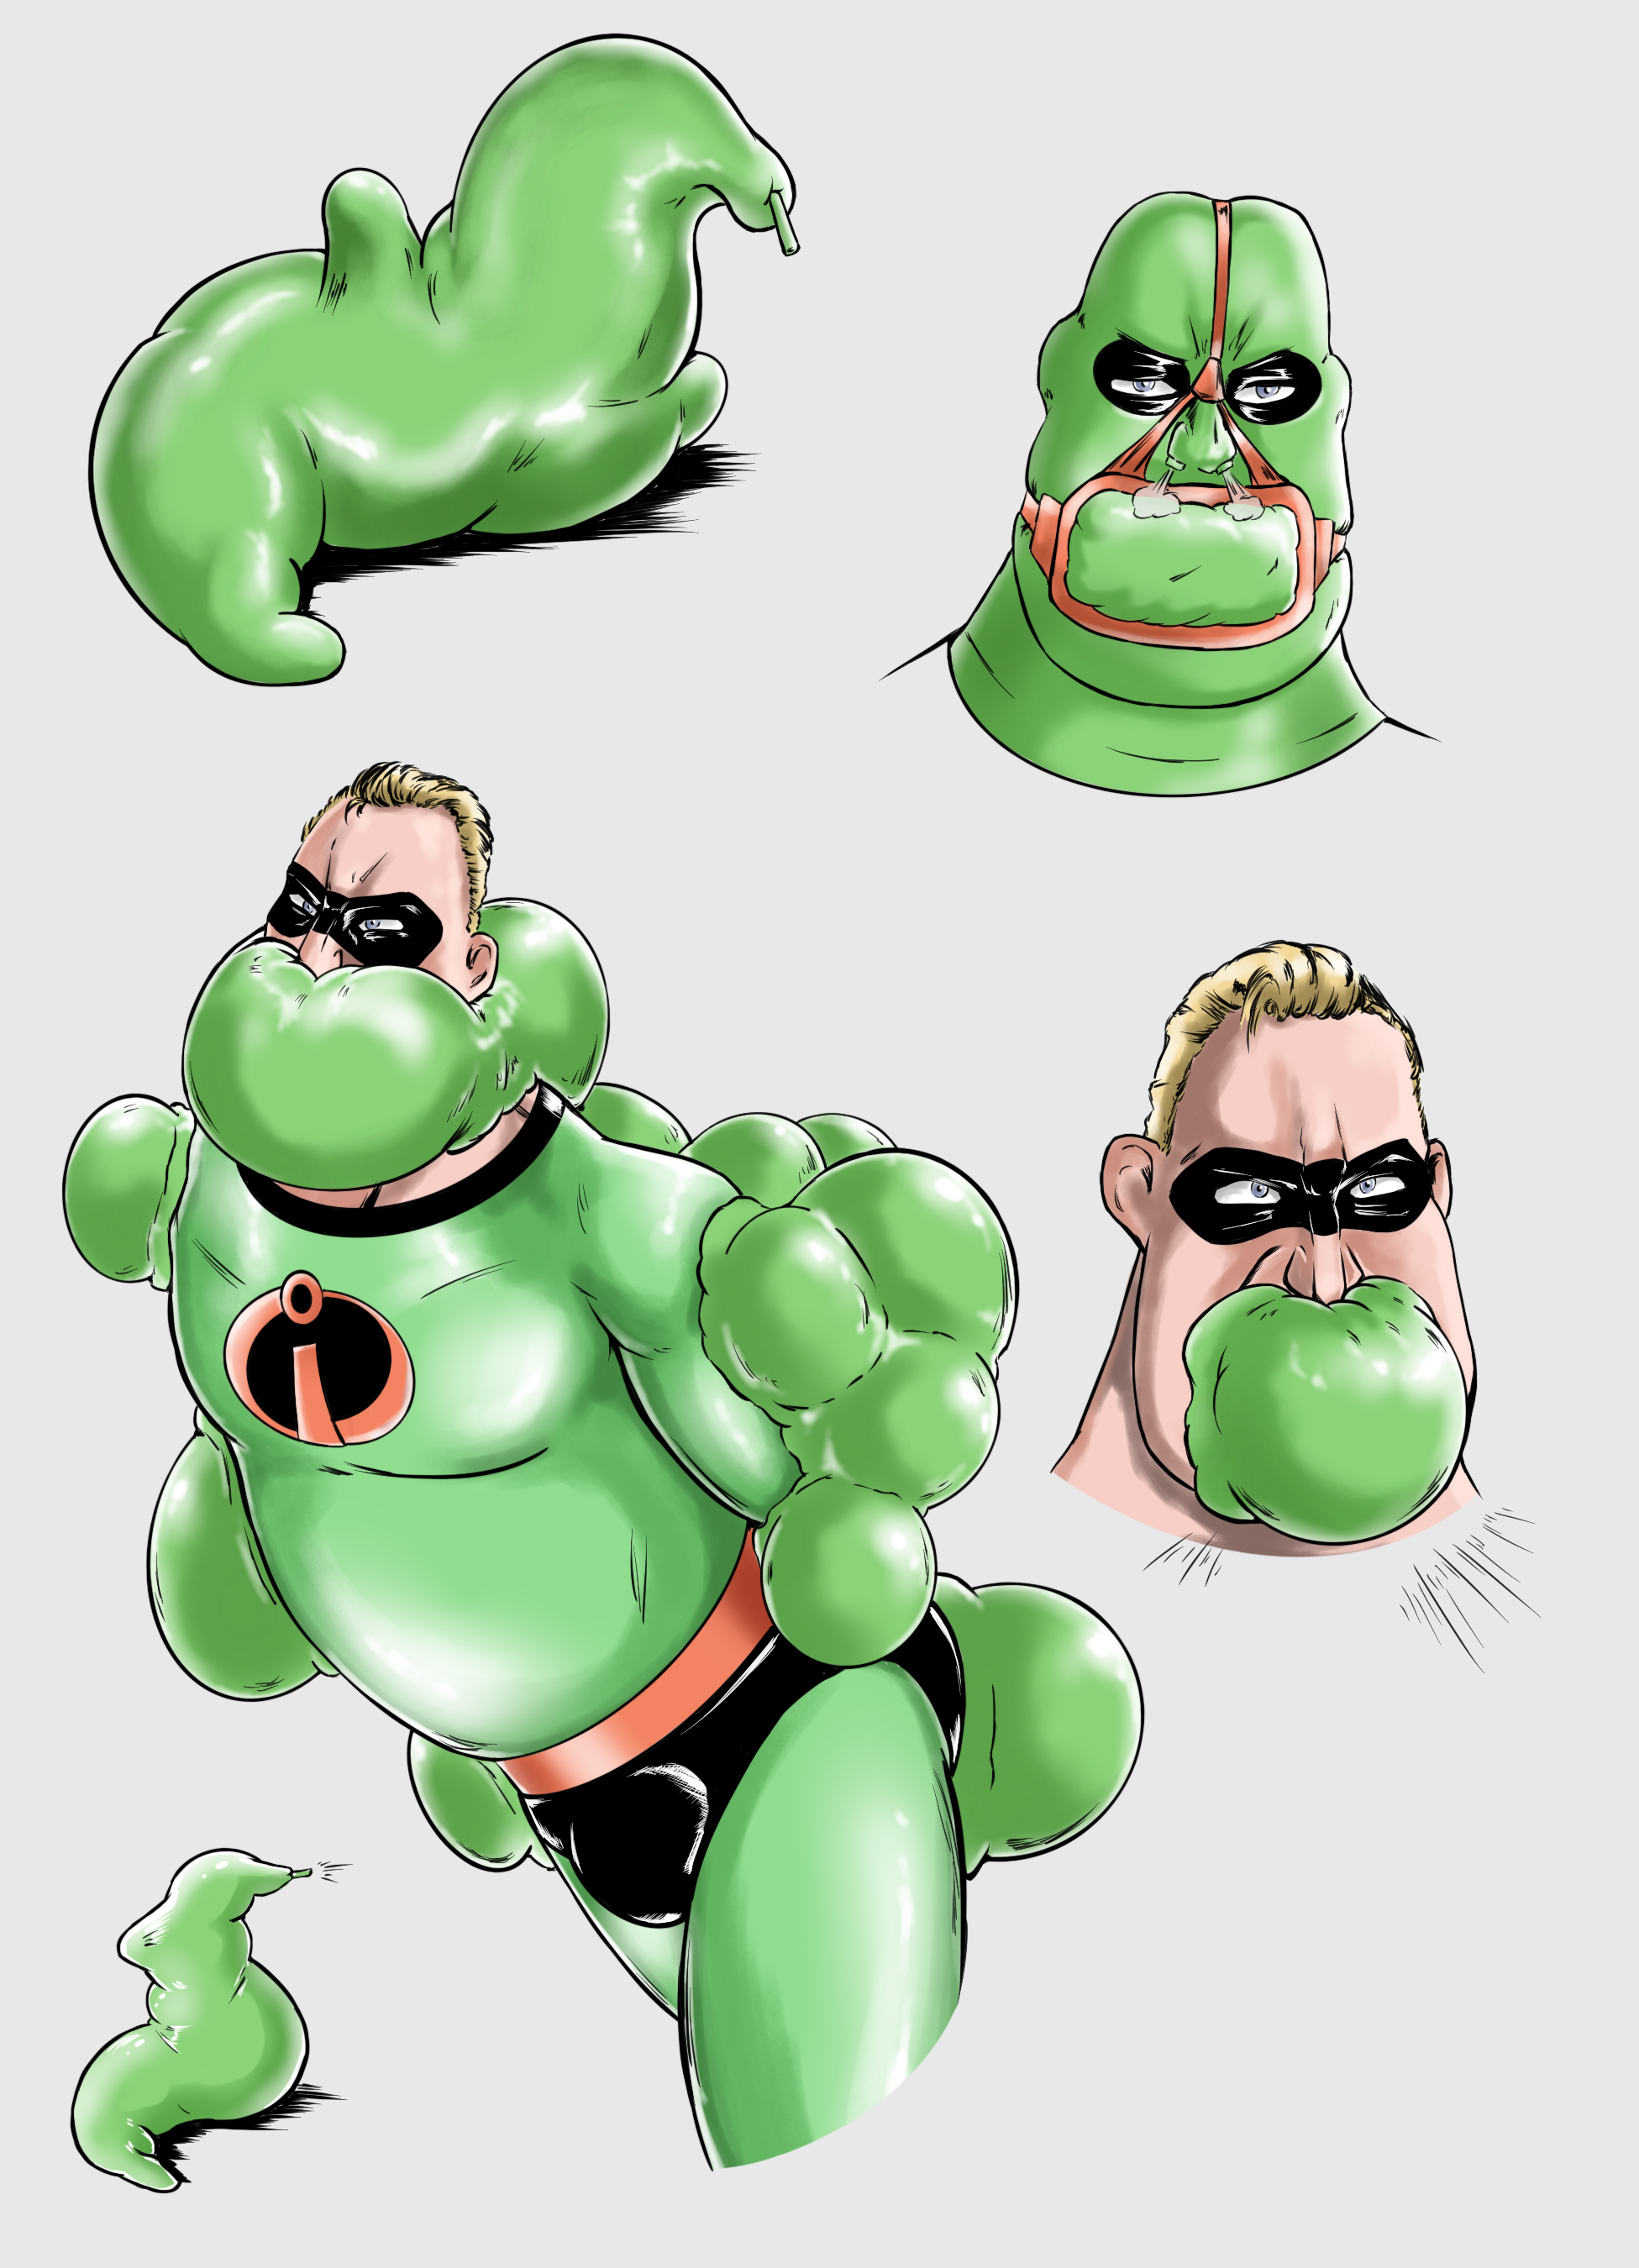 I (tried) making the mr incredible becoming uncanny, sorry if it's